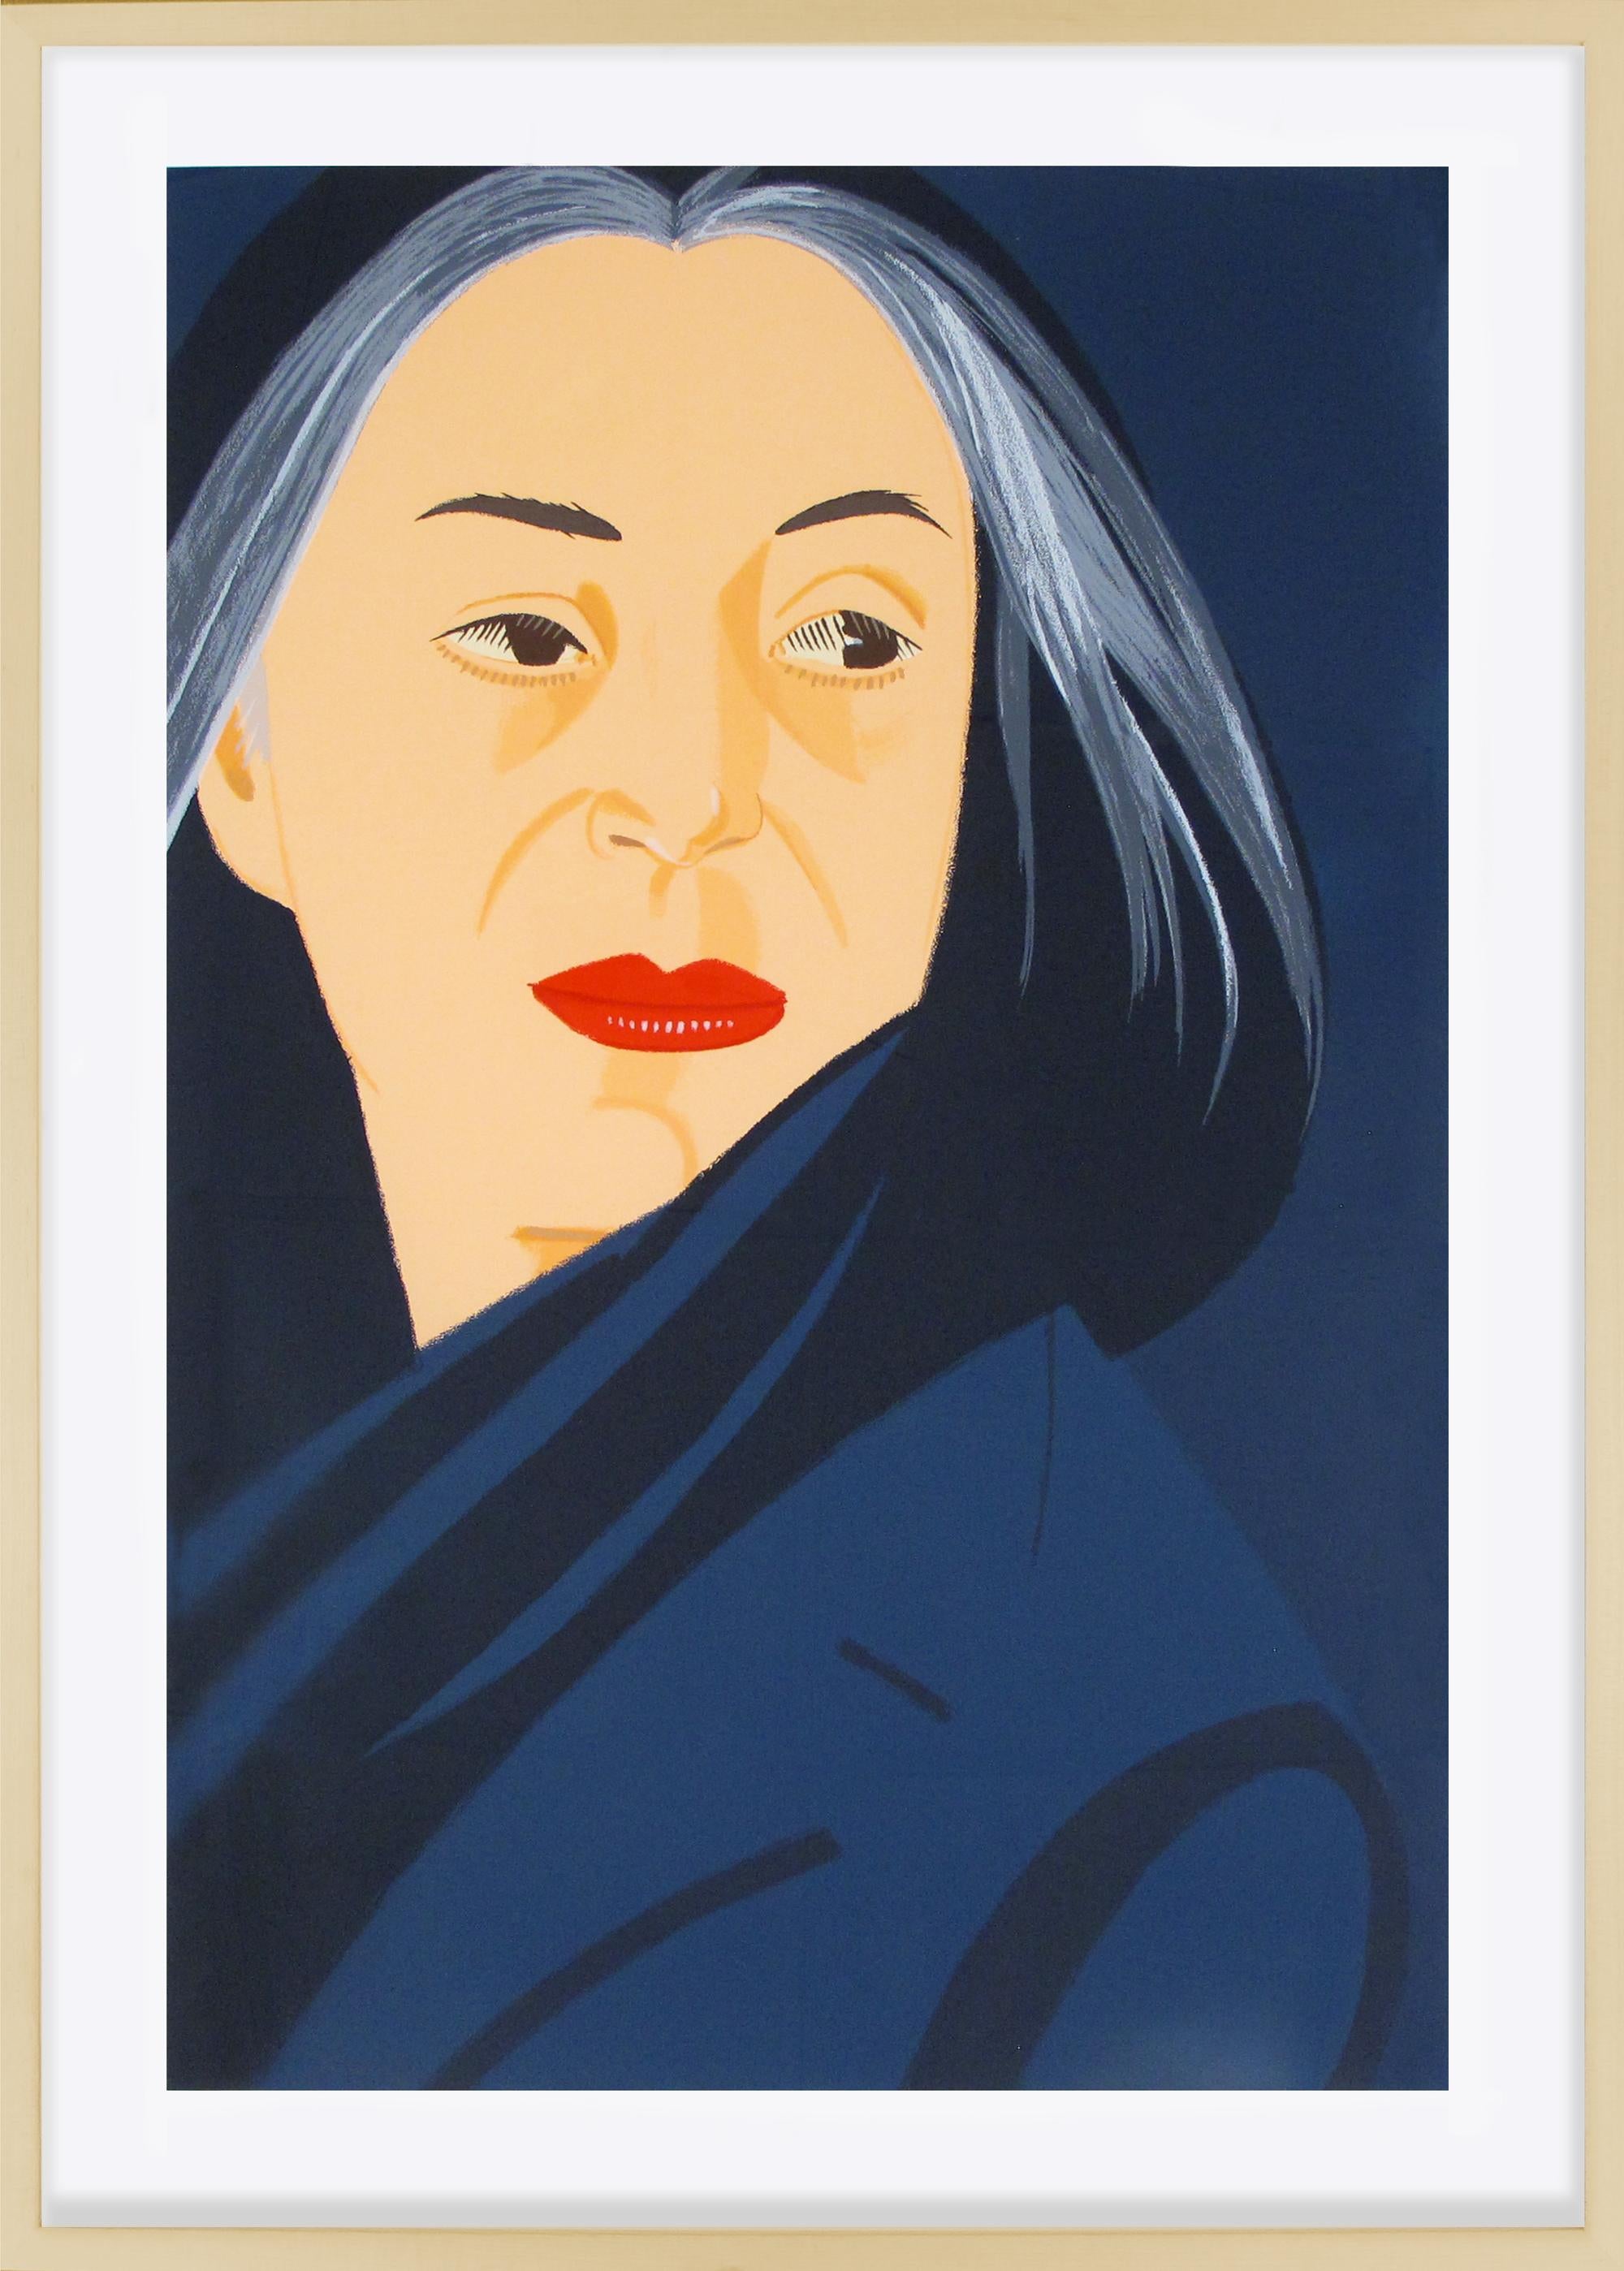 ALEX KATZ
(B. 1927)
"Black Scarf"
Screenprint in colors on Arches paper, 1996 Signed in pencil in lower margin
Edition 51 or 75
Sheet Size: 43 1⁄4”x 30 7/8”

In the early 1960s, influenced by films, television, and billboard advertising, Katz began